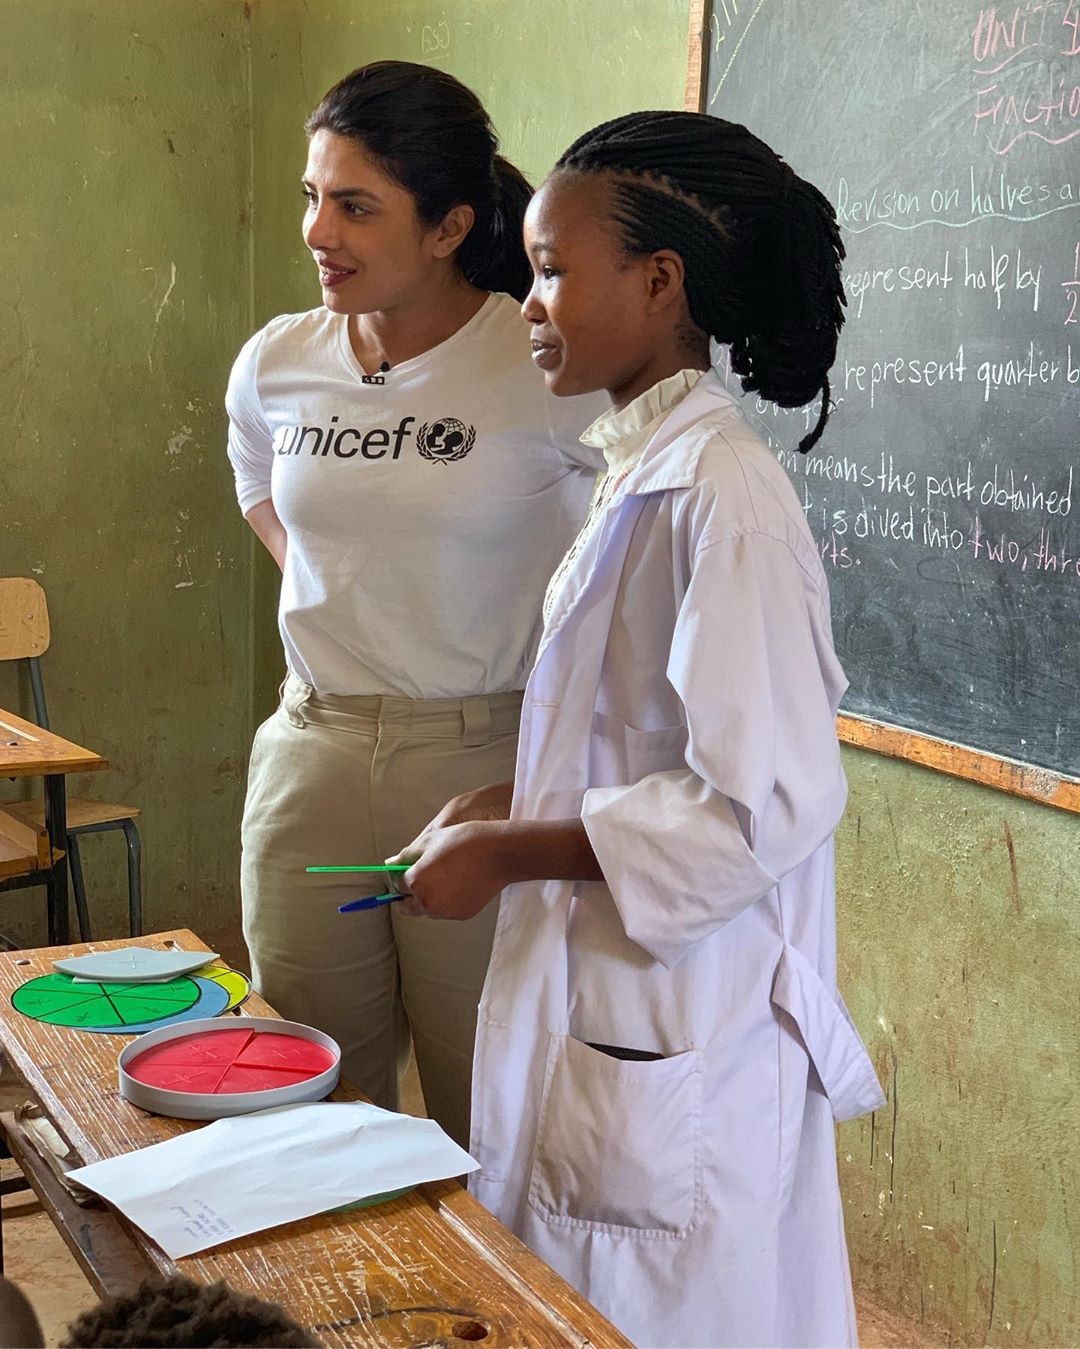 Addis Ababa: After enthralling fans with her fashion game at the Cannes Film Festival 2019, actress Priyanka Chopra Jonas is currently in Ethiopia spending time with refugee children. (priyankachopra/Instagram) by .